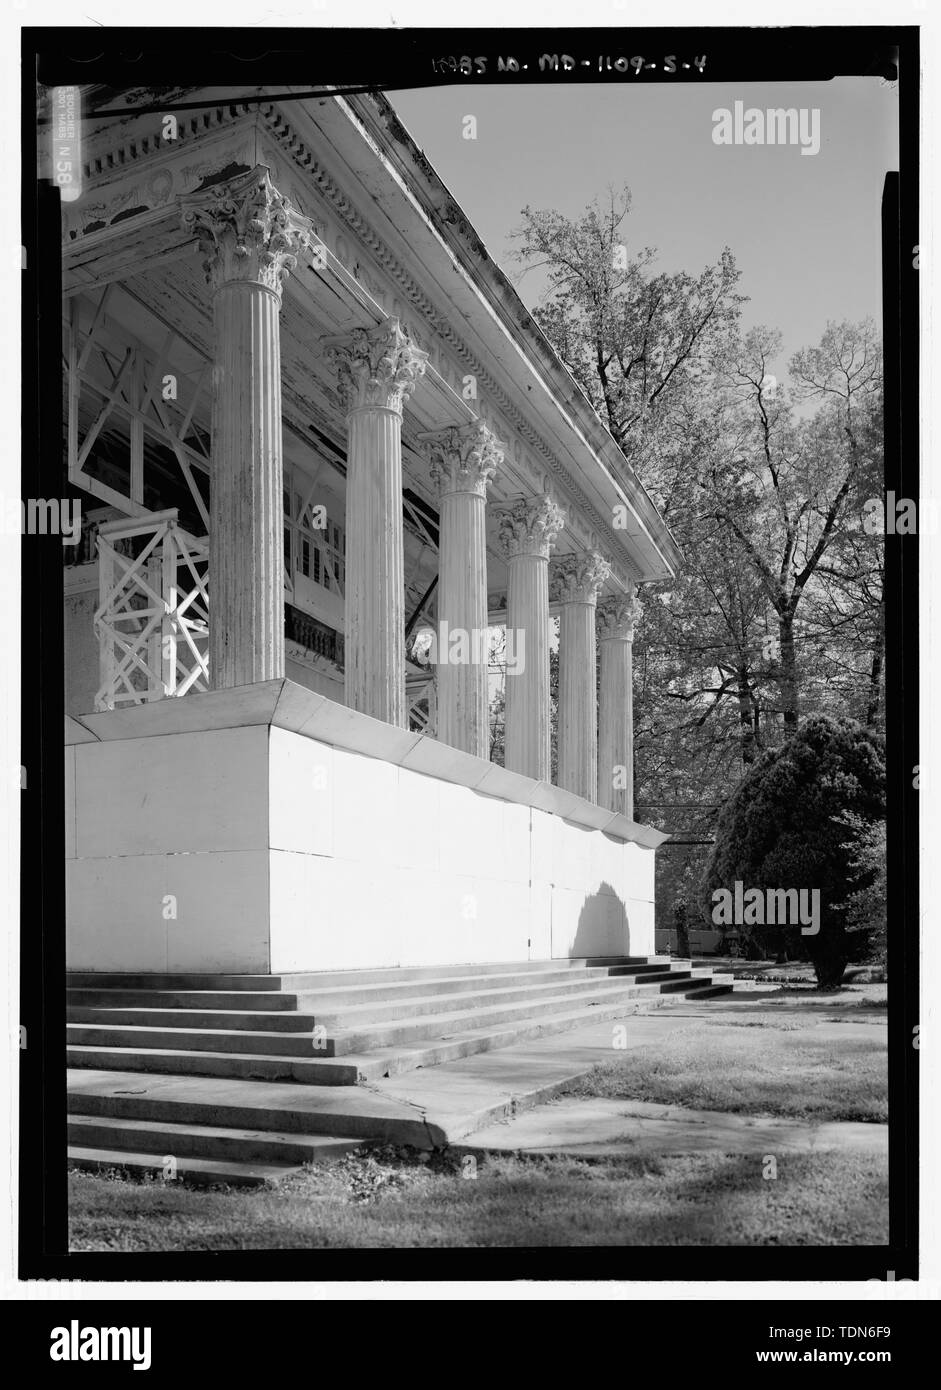 Perspective view of the entrance pavilion - National Park Seminary, Gymnasium, North of Linden Lane, south of Aloha House, Silver Spring, Montgomery County, MD; Ament, James E; Price, Virginia B, transmitter; Ott, Cynthia, historian; Boucher, Jack E, photographer; Lavoie, Catherine C, project manager; Price, Virginia B, transmitter; Price, Virginia B, transmitter Stock Photo